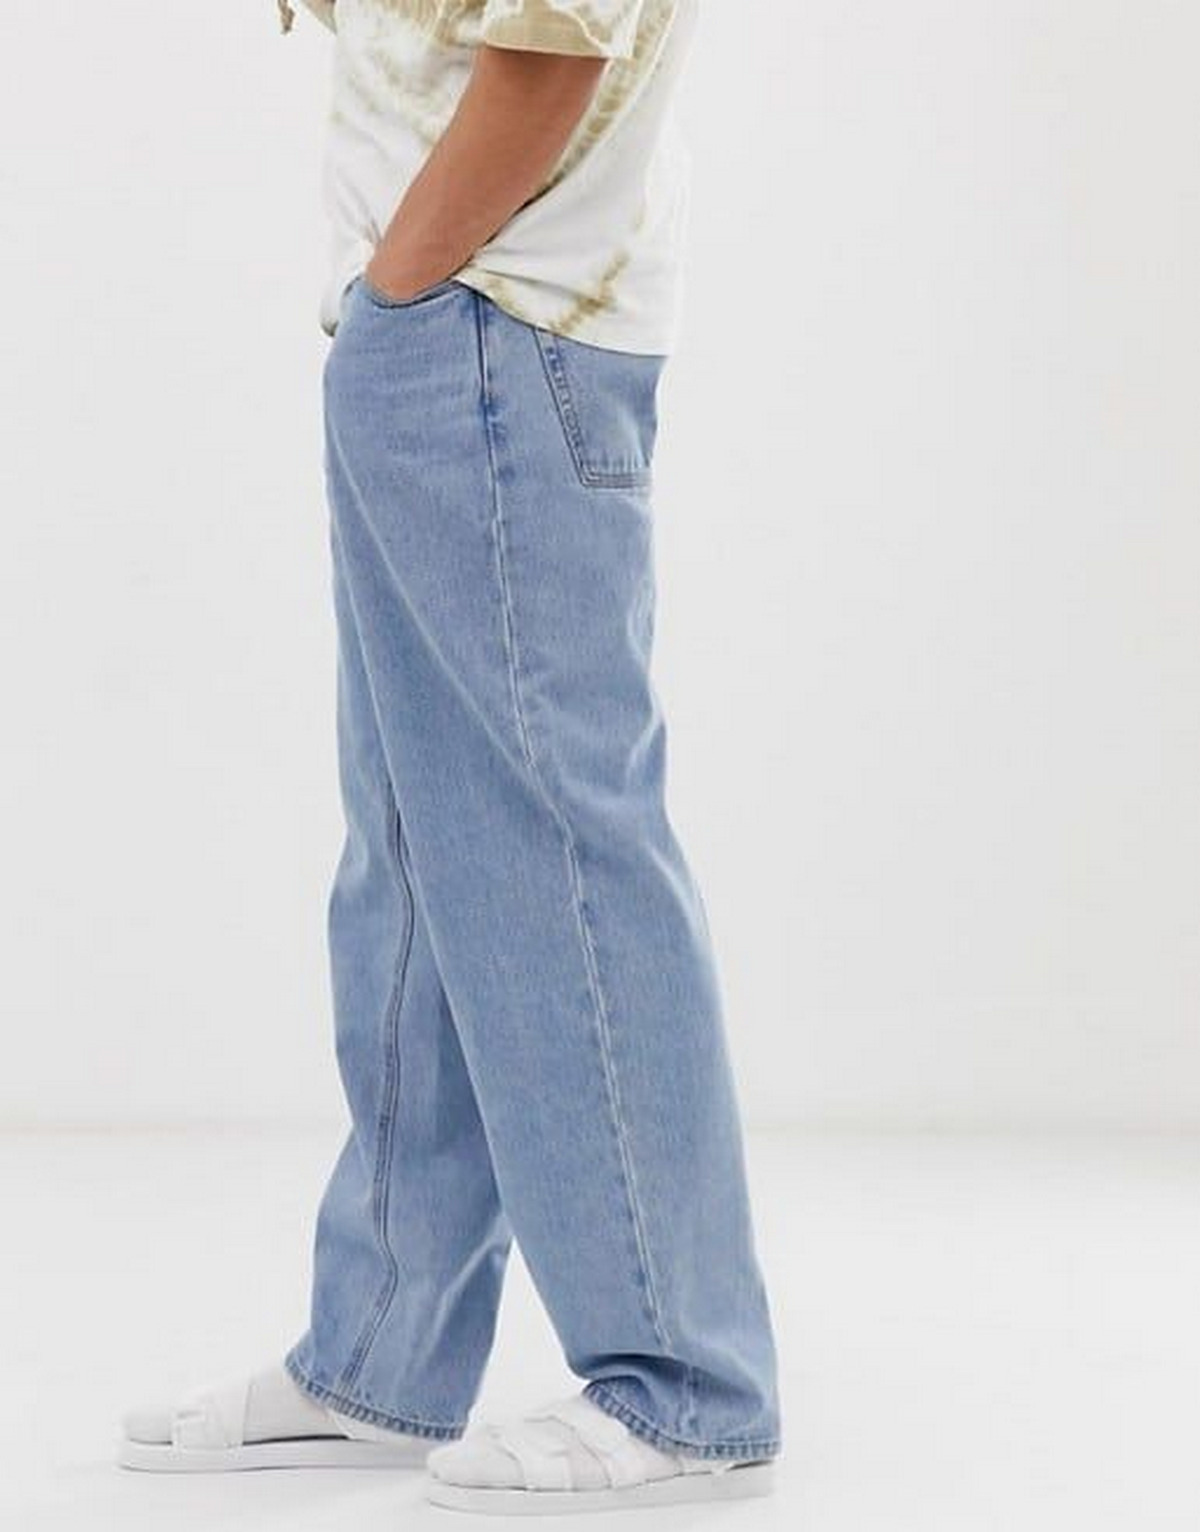 90s Jeans 